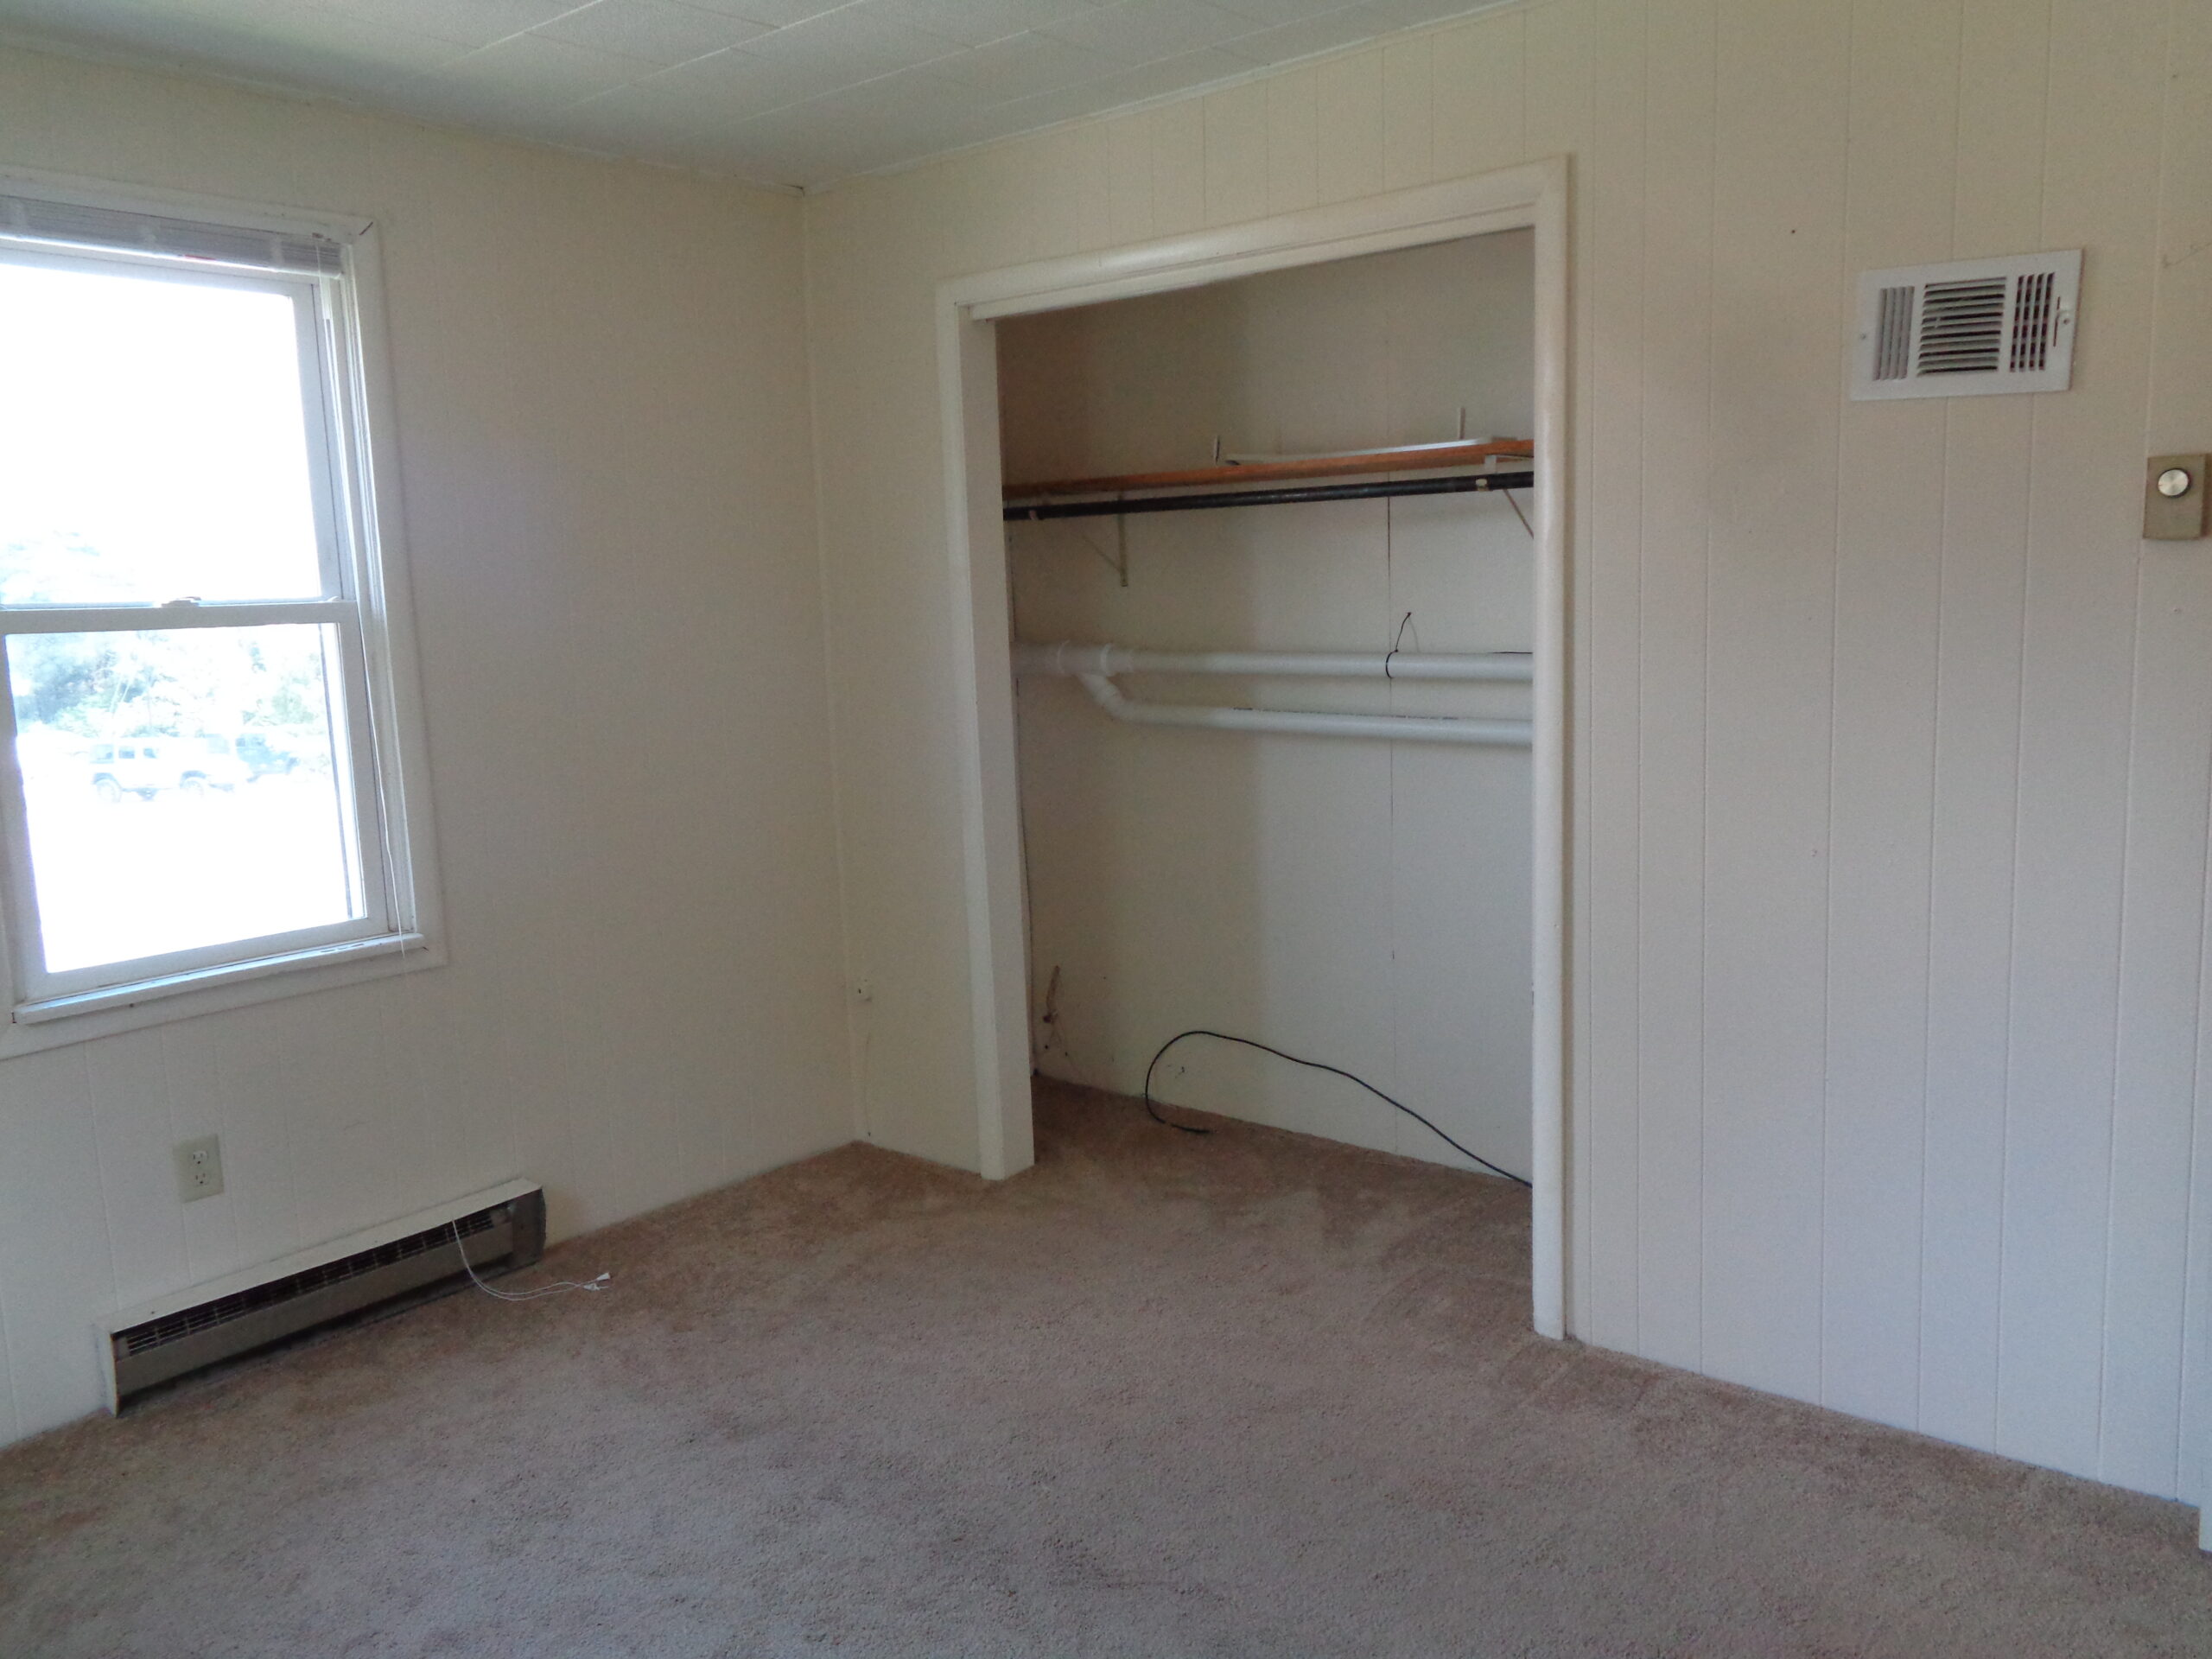 Two Bedroom Upstairs Apartment at 108 Grand Ave, Clarion, PA